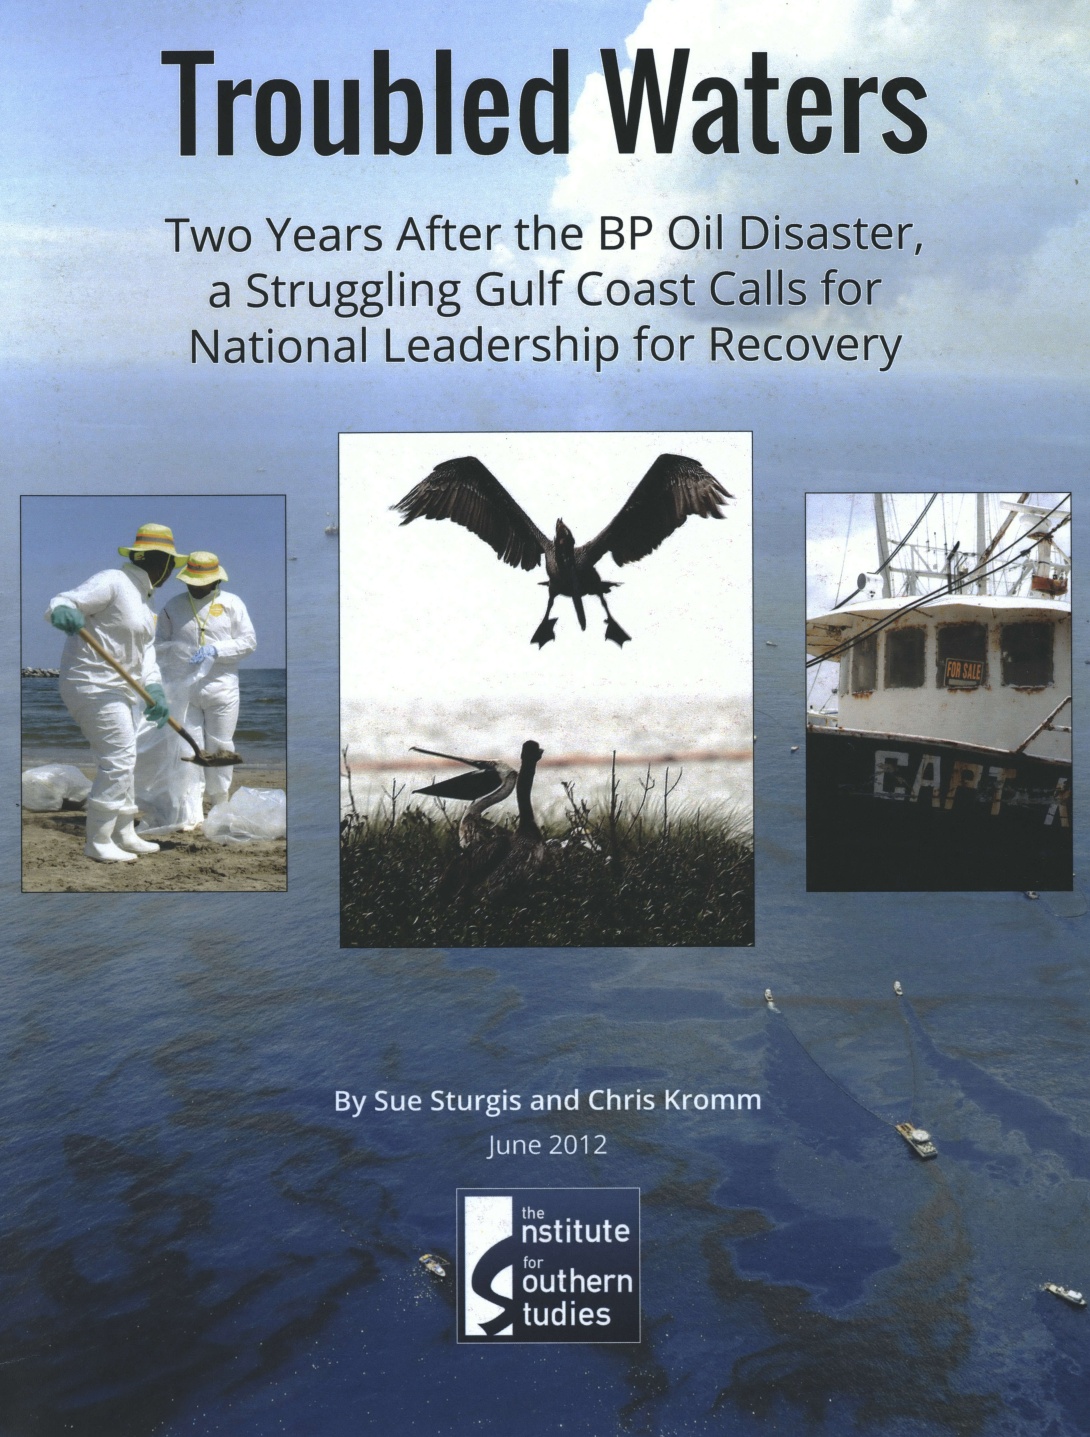 Report cover with photos of BP oil spill cleanup, text reads "Troubled Waters: Two Years After the BP Oil Disaster, a Struggling Gulf Coast Calls for National Leadership for Recovery"